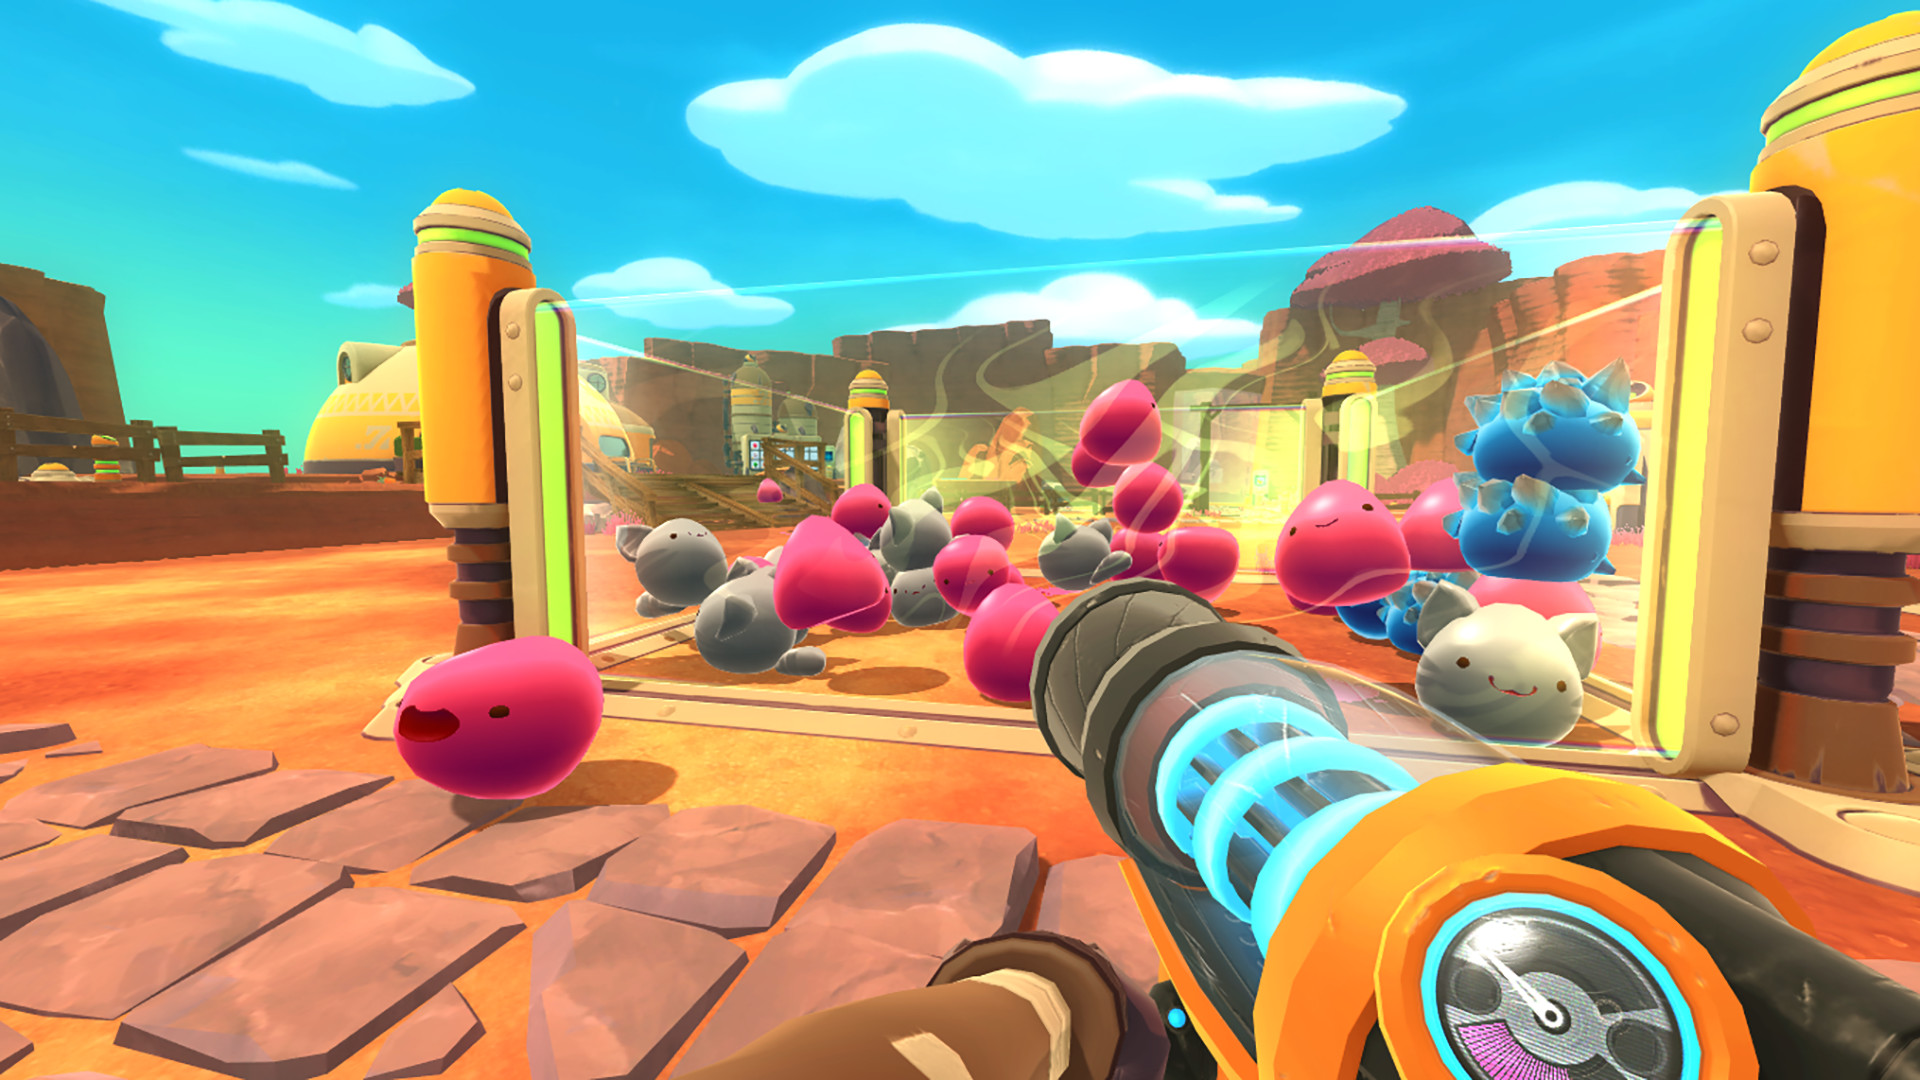 download slime rancher switch